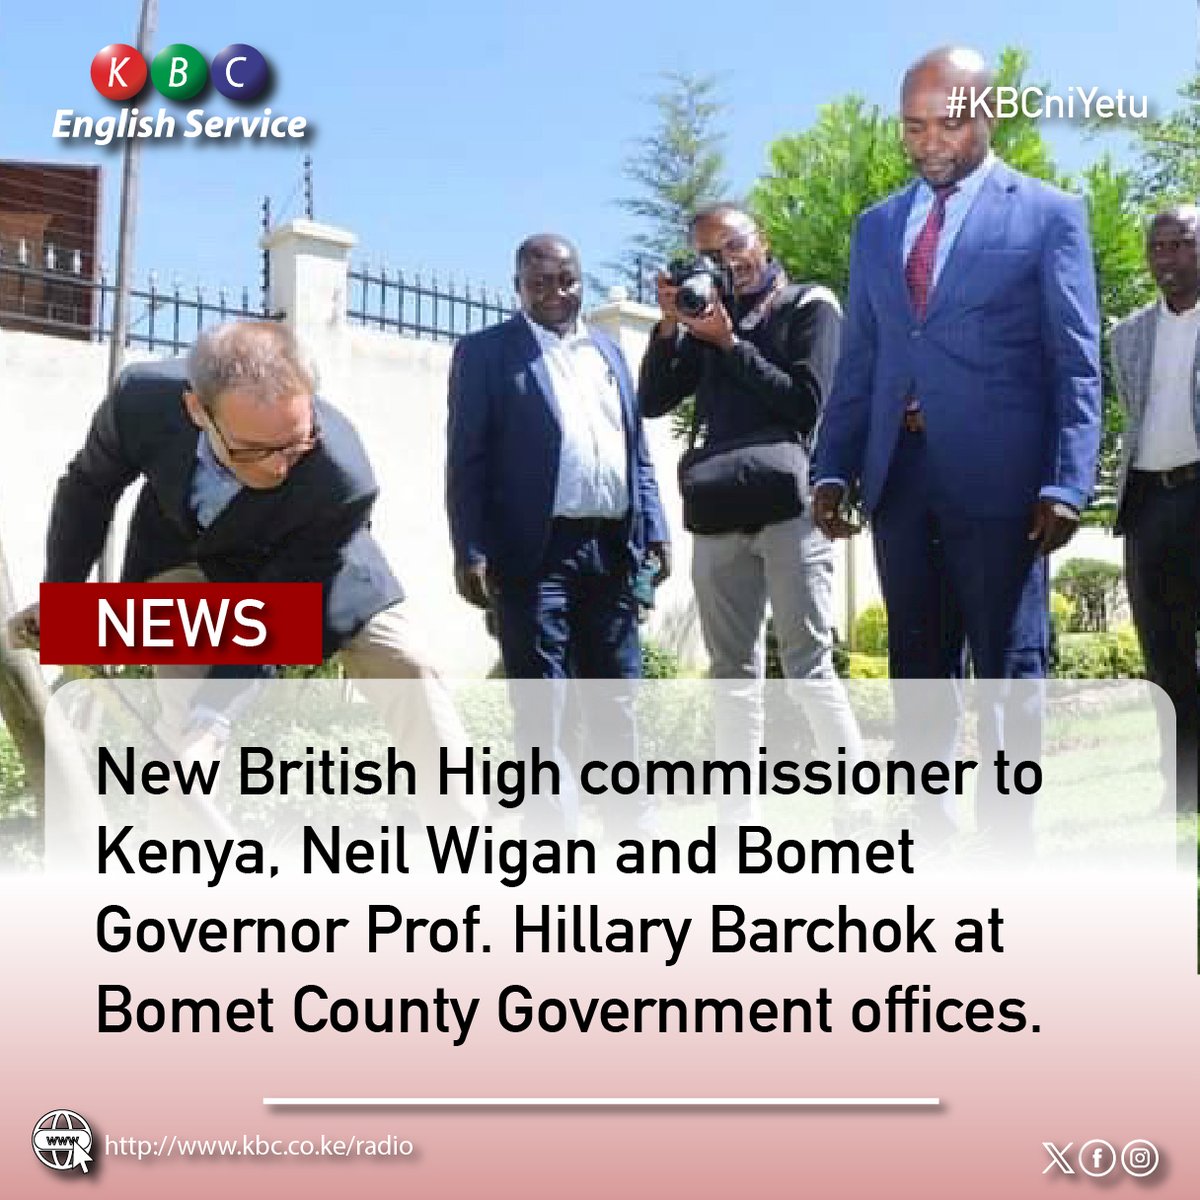 New British High commissioner to Kenya, Neil Wigan and Bomet Governor Prof. Hillary Barchok at Bomet County Government offices. ^PMN #KBCEnglishService